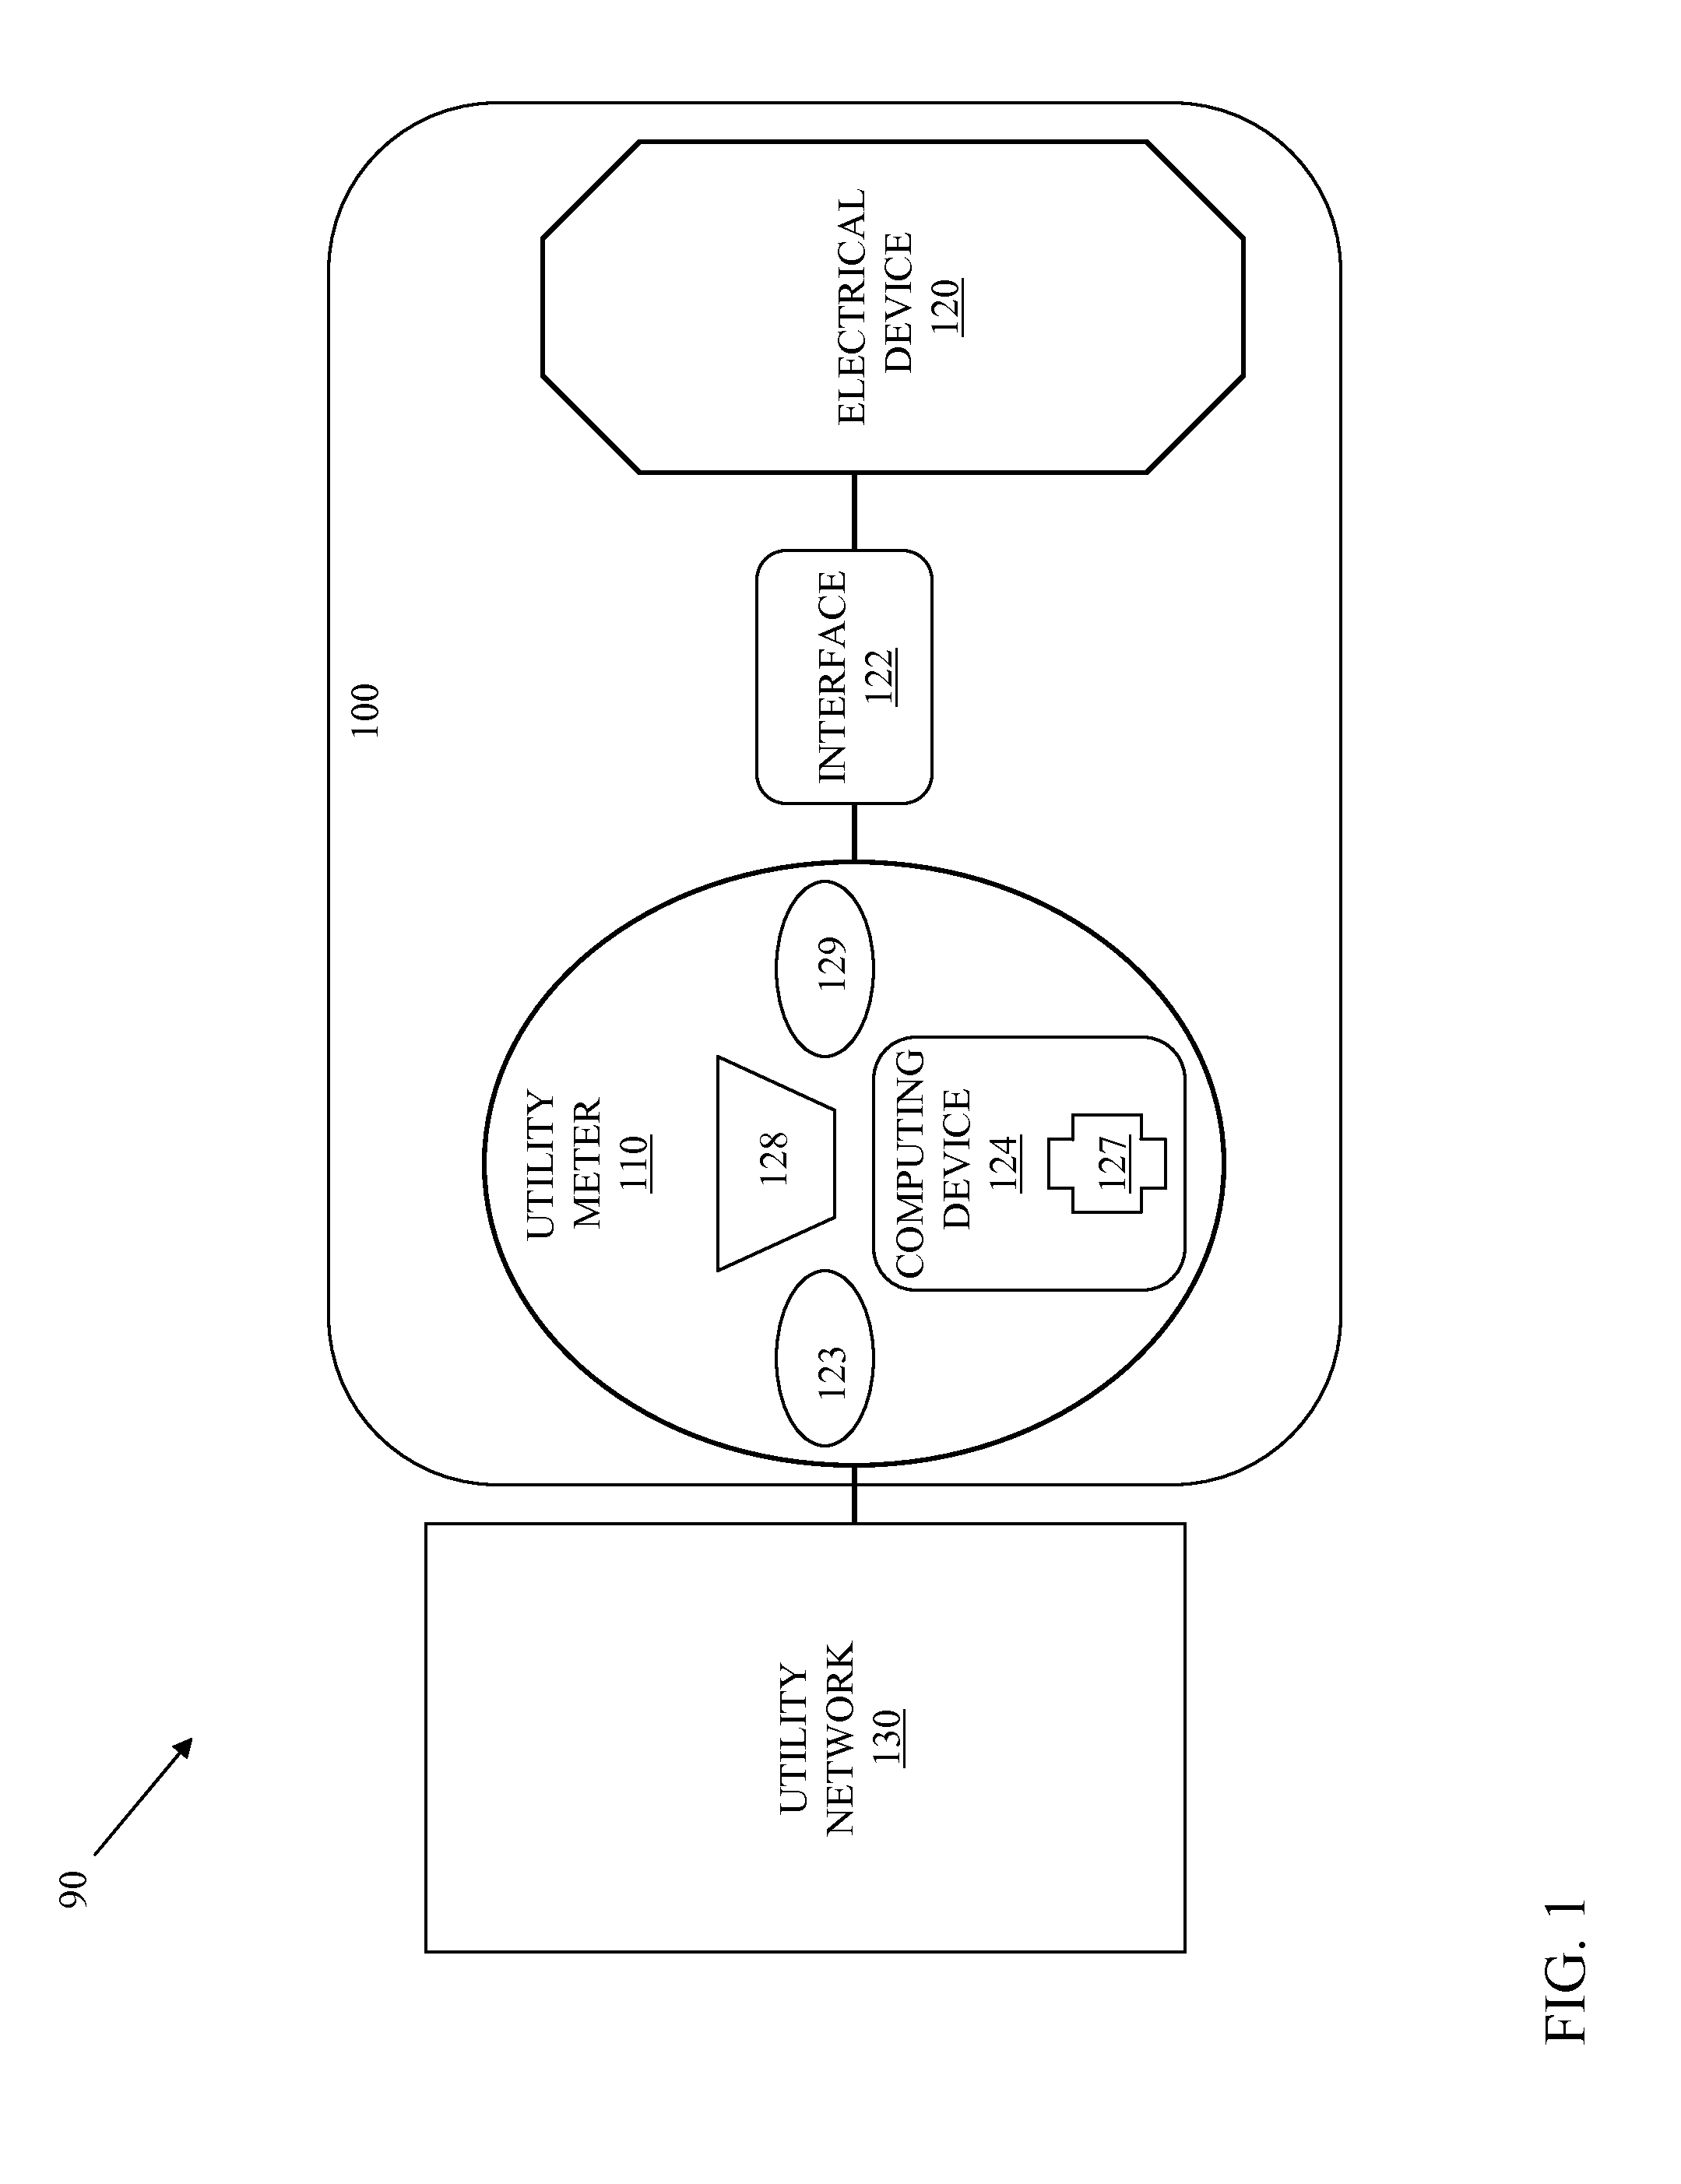 Monitoring system for an electrical device